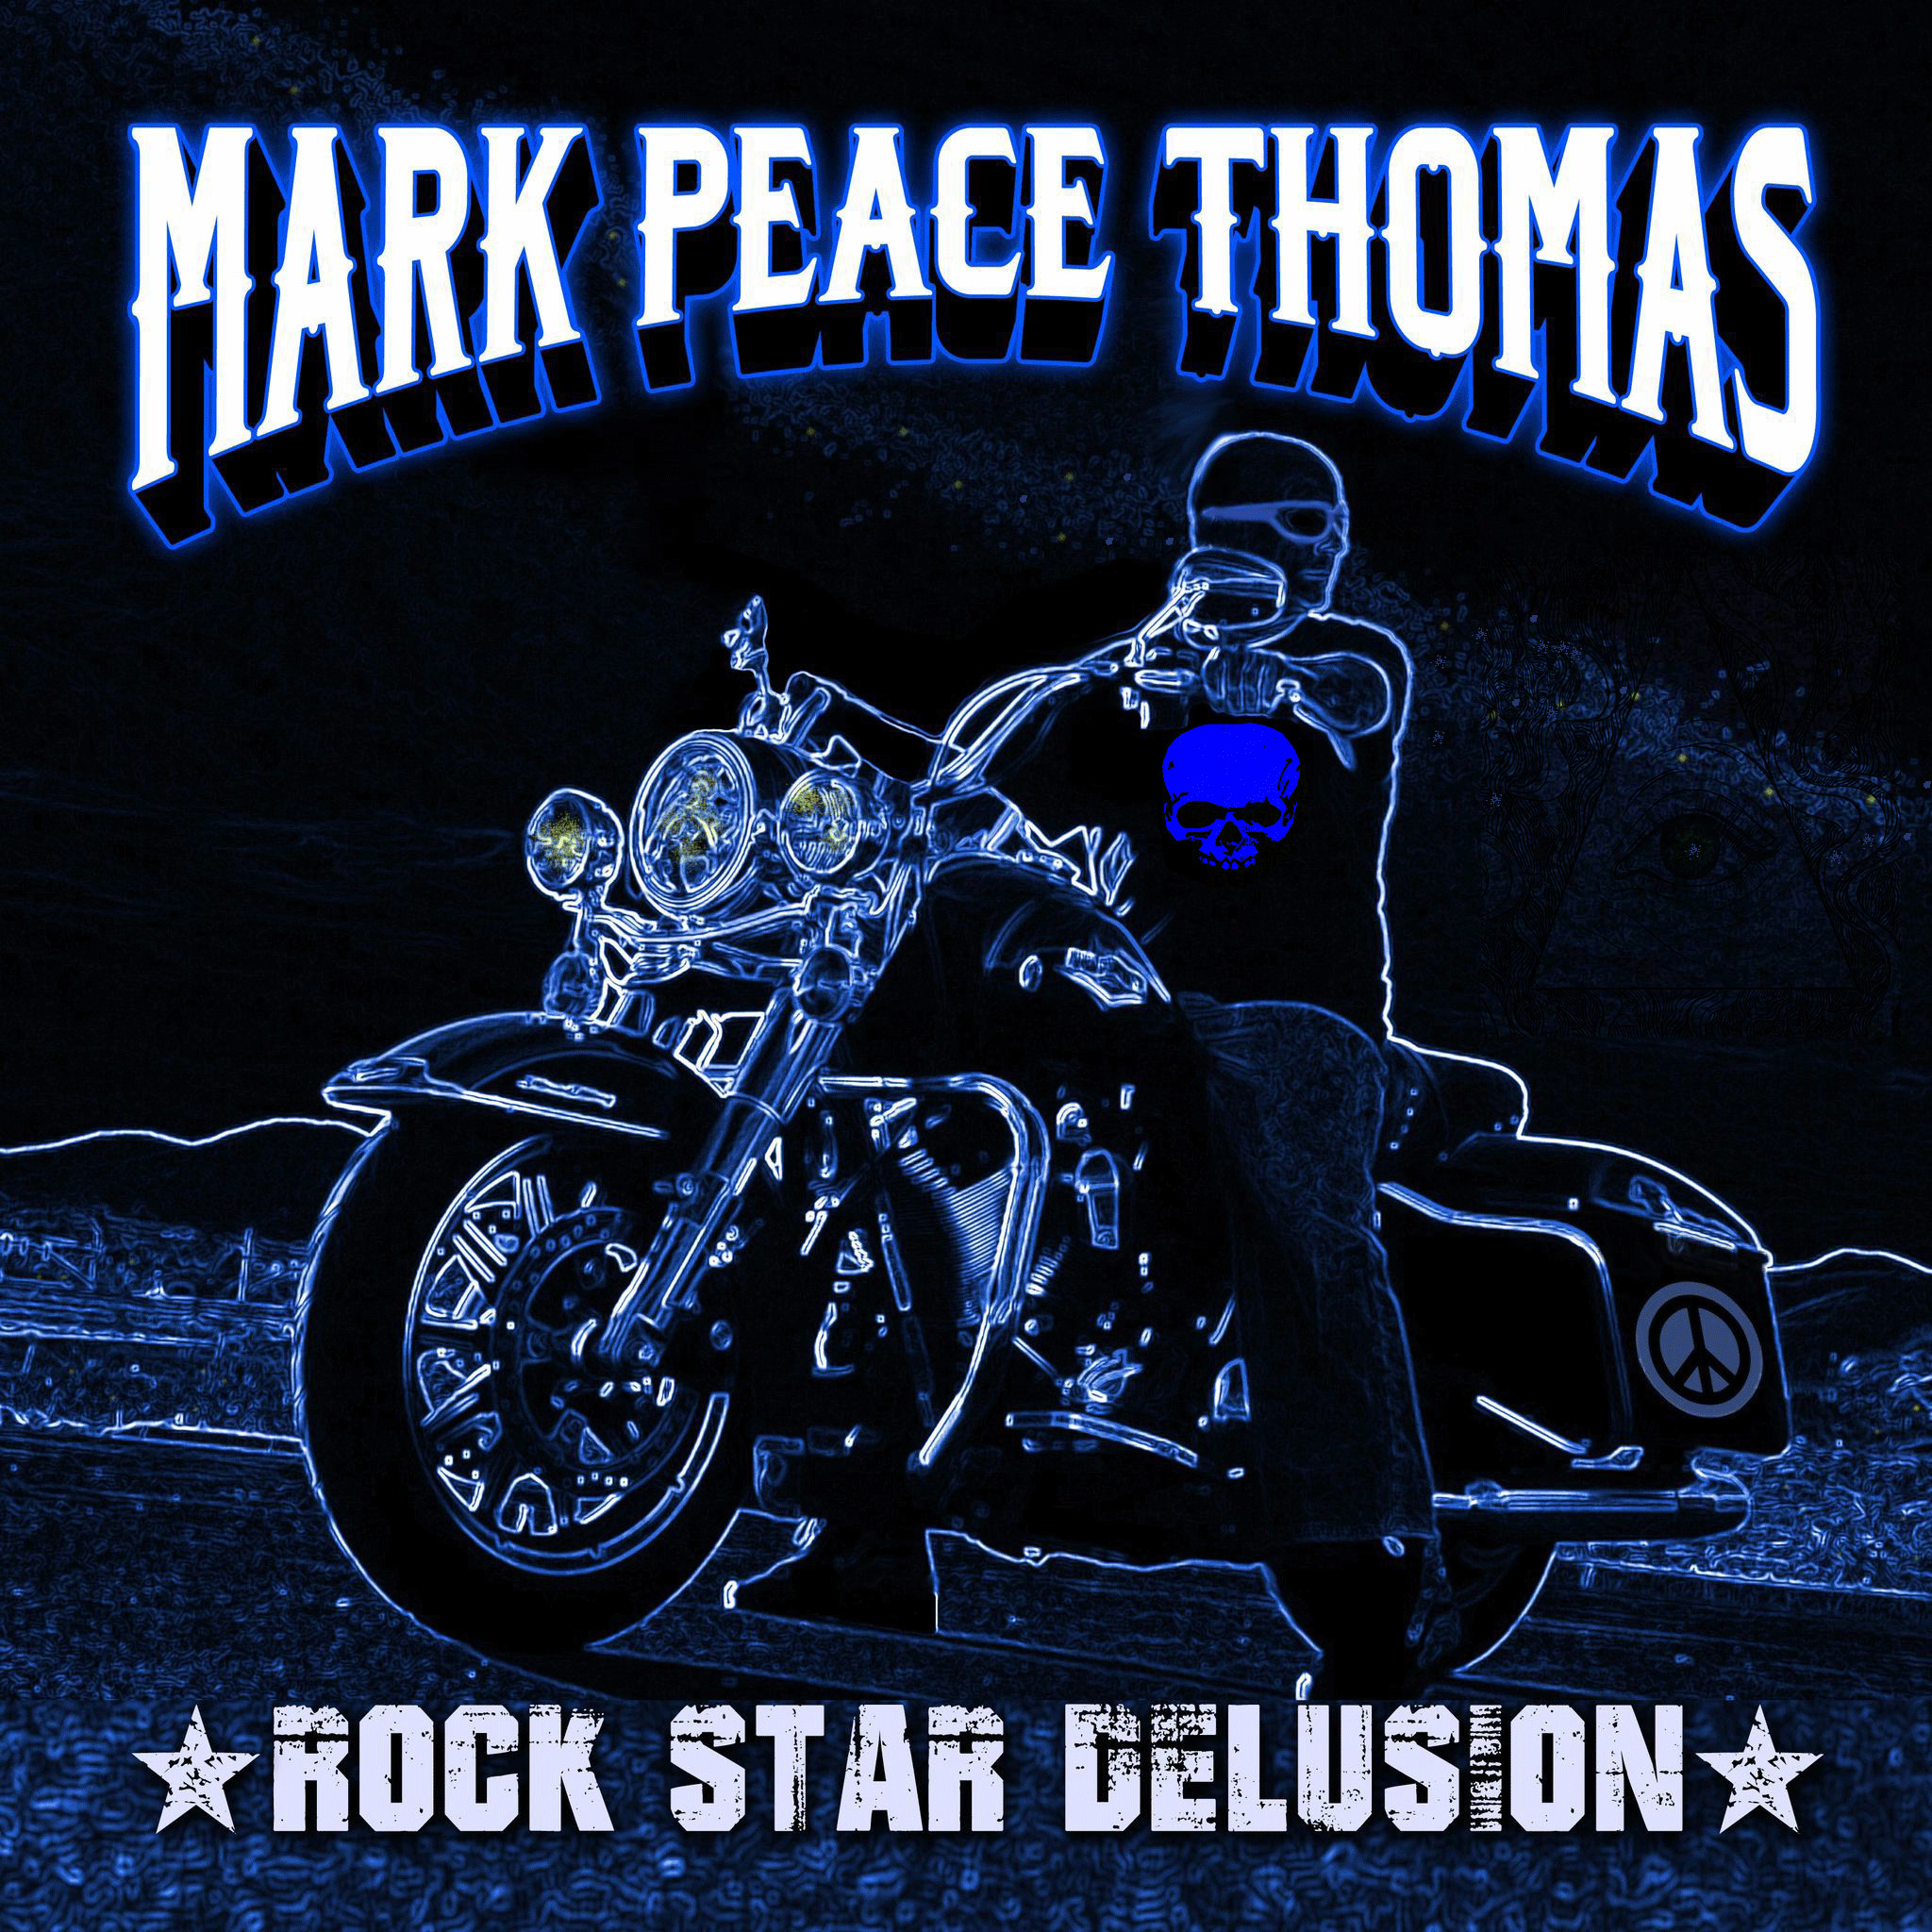 Does Singer Mark Peace Thomas Have a Rock Star Delusion?